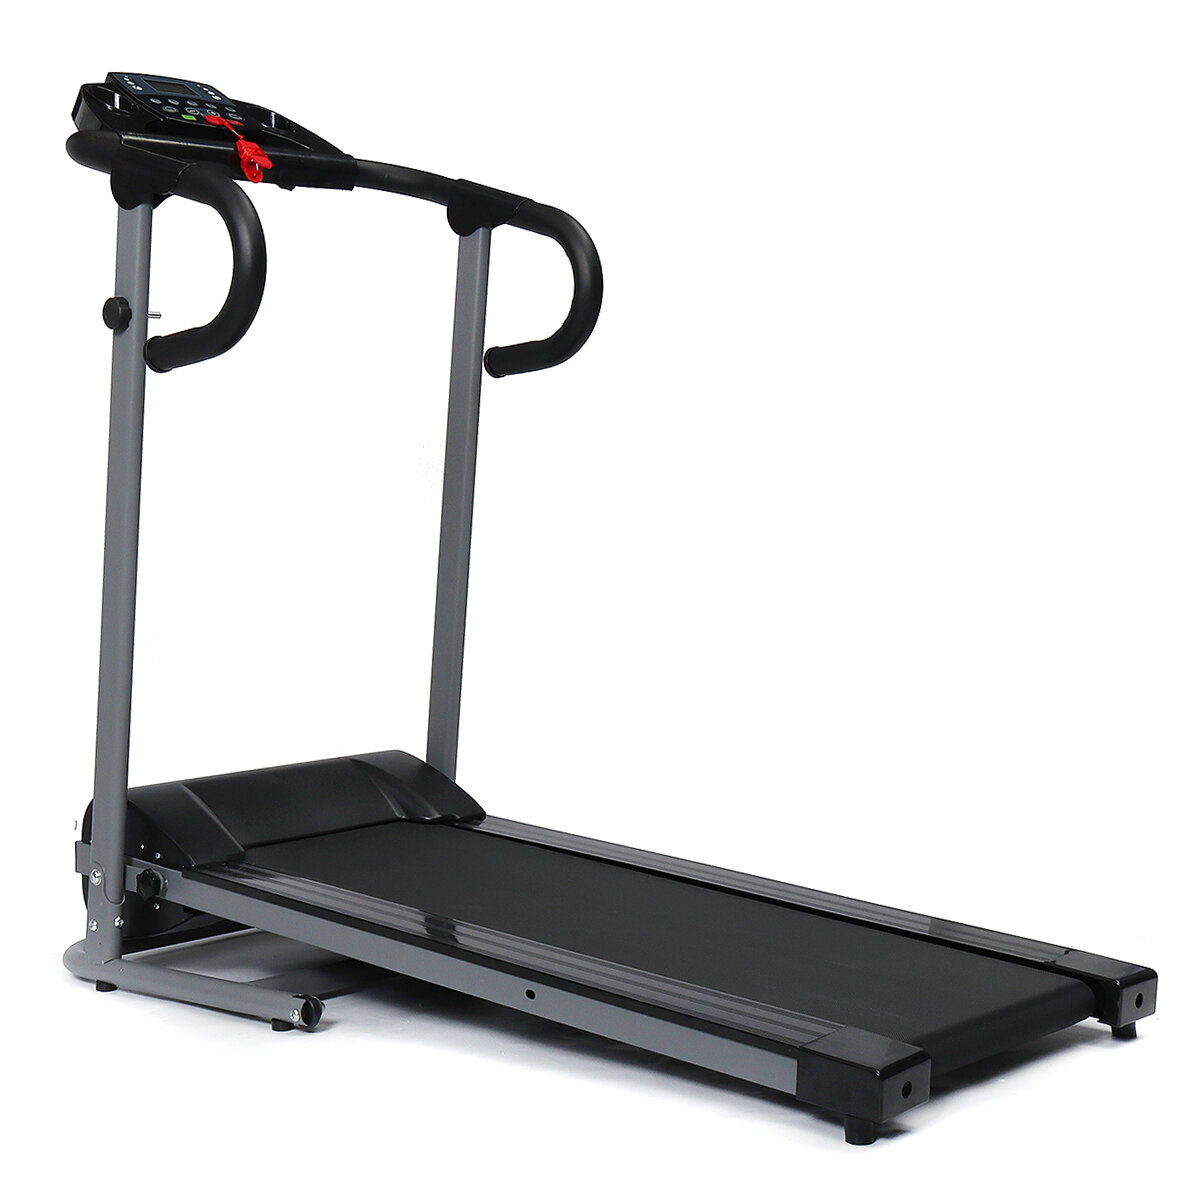 [AU Stock] 500W 0.8-10km/h LCD Folding Treadmill Multi-function Silent Electric Sport Running Machine Home Gym Fitness